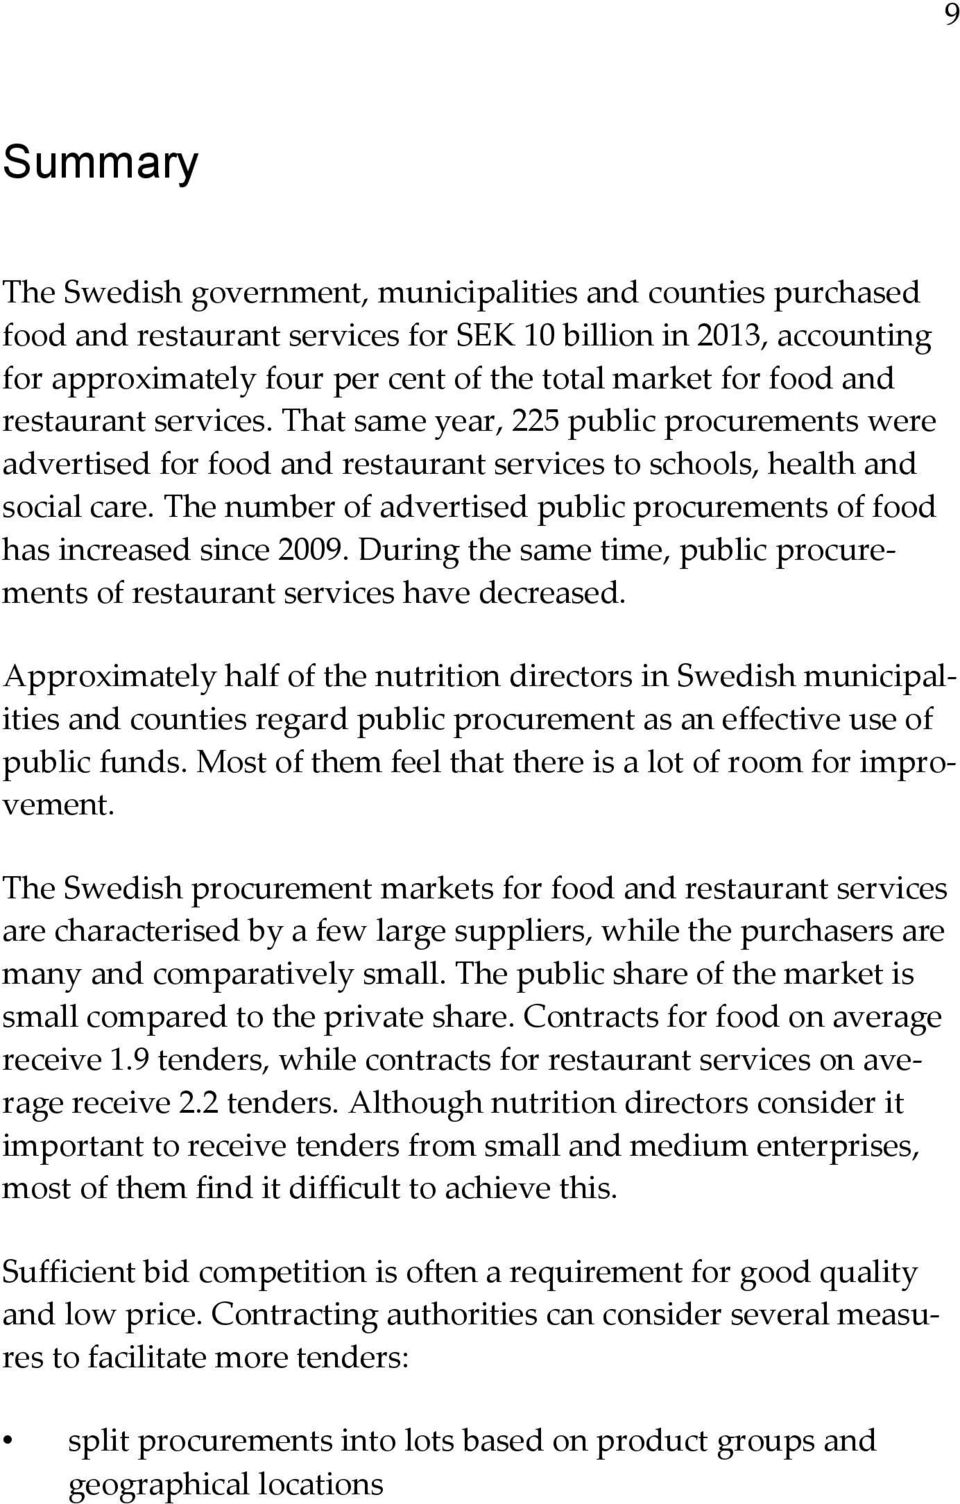 The number of advertised public procurements of food has increased since 2009. During the same time, public procurements of restaurant services have decreased.